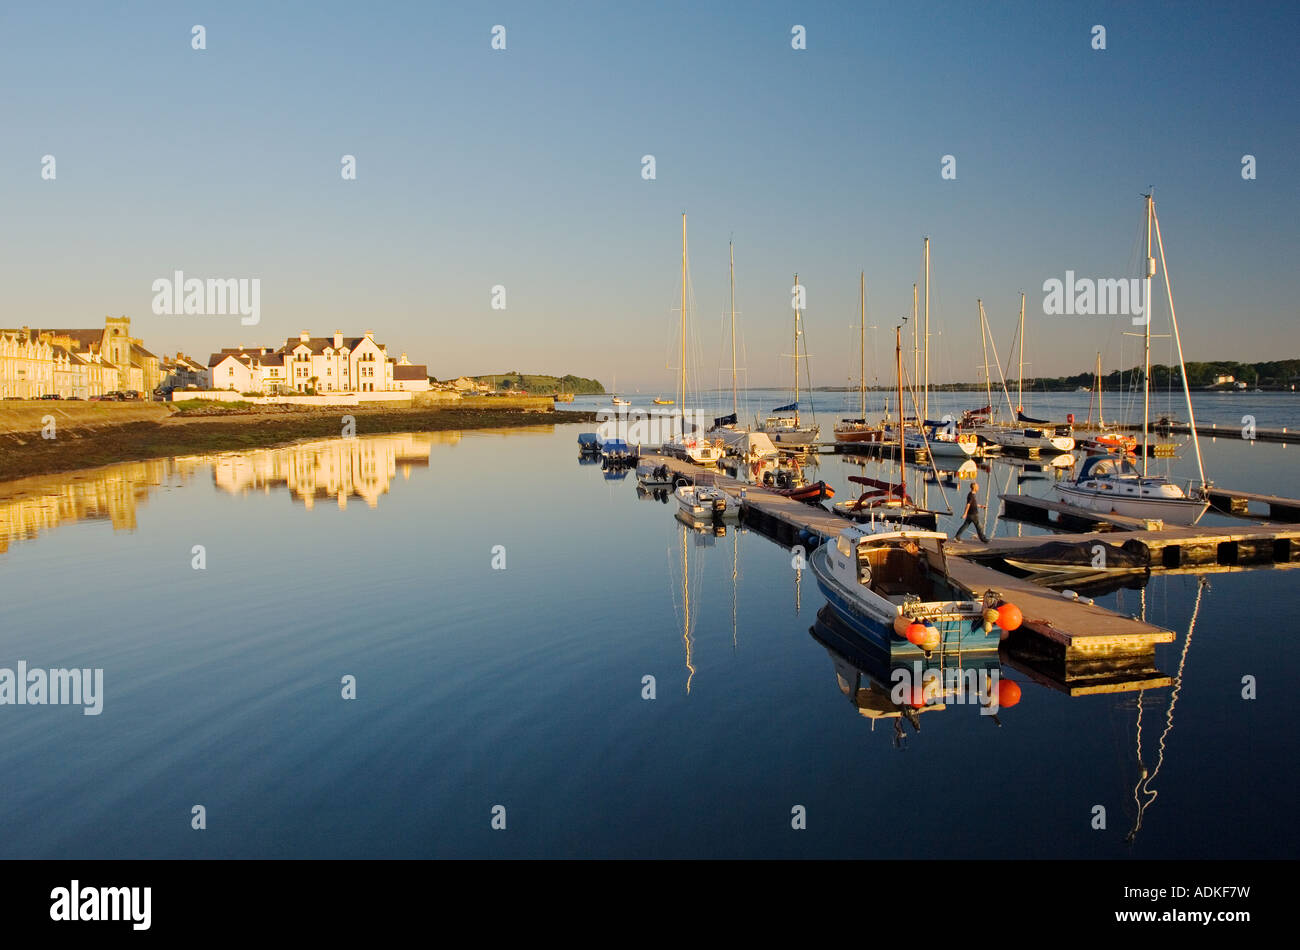 Warm summer evening light on the village harbour marina of Portaferry at the entrance to Strangford Lough, County Down, Ireland. Stock Photo